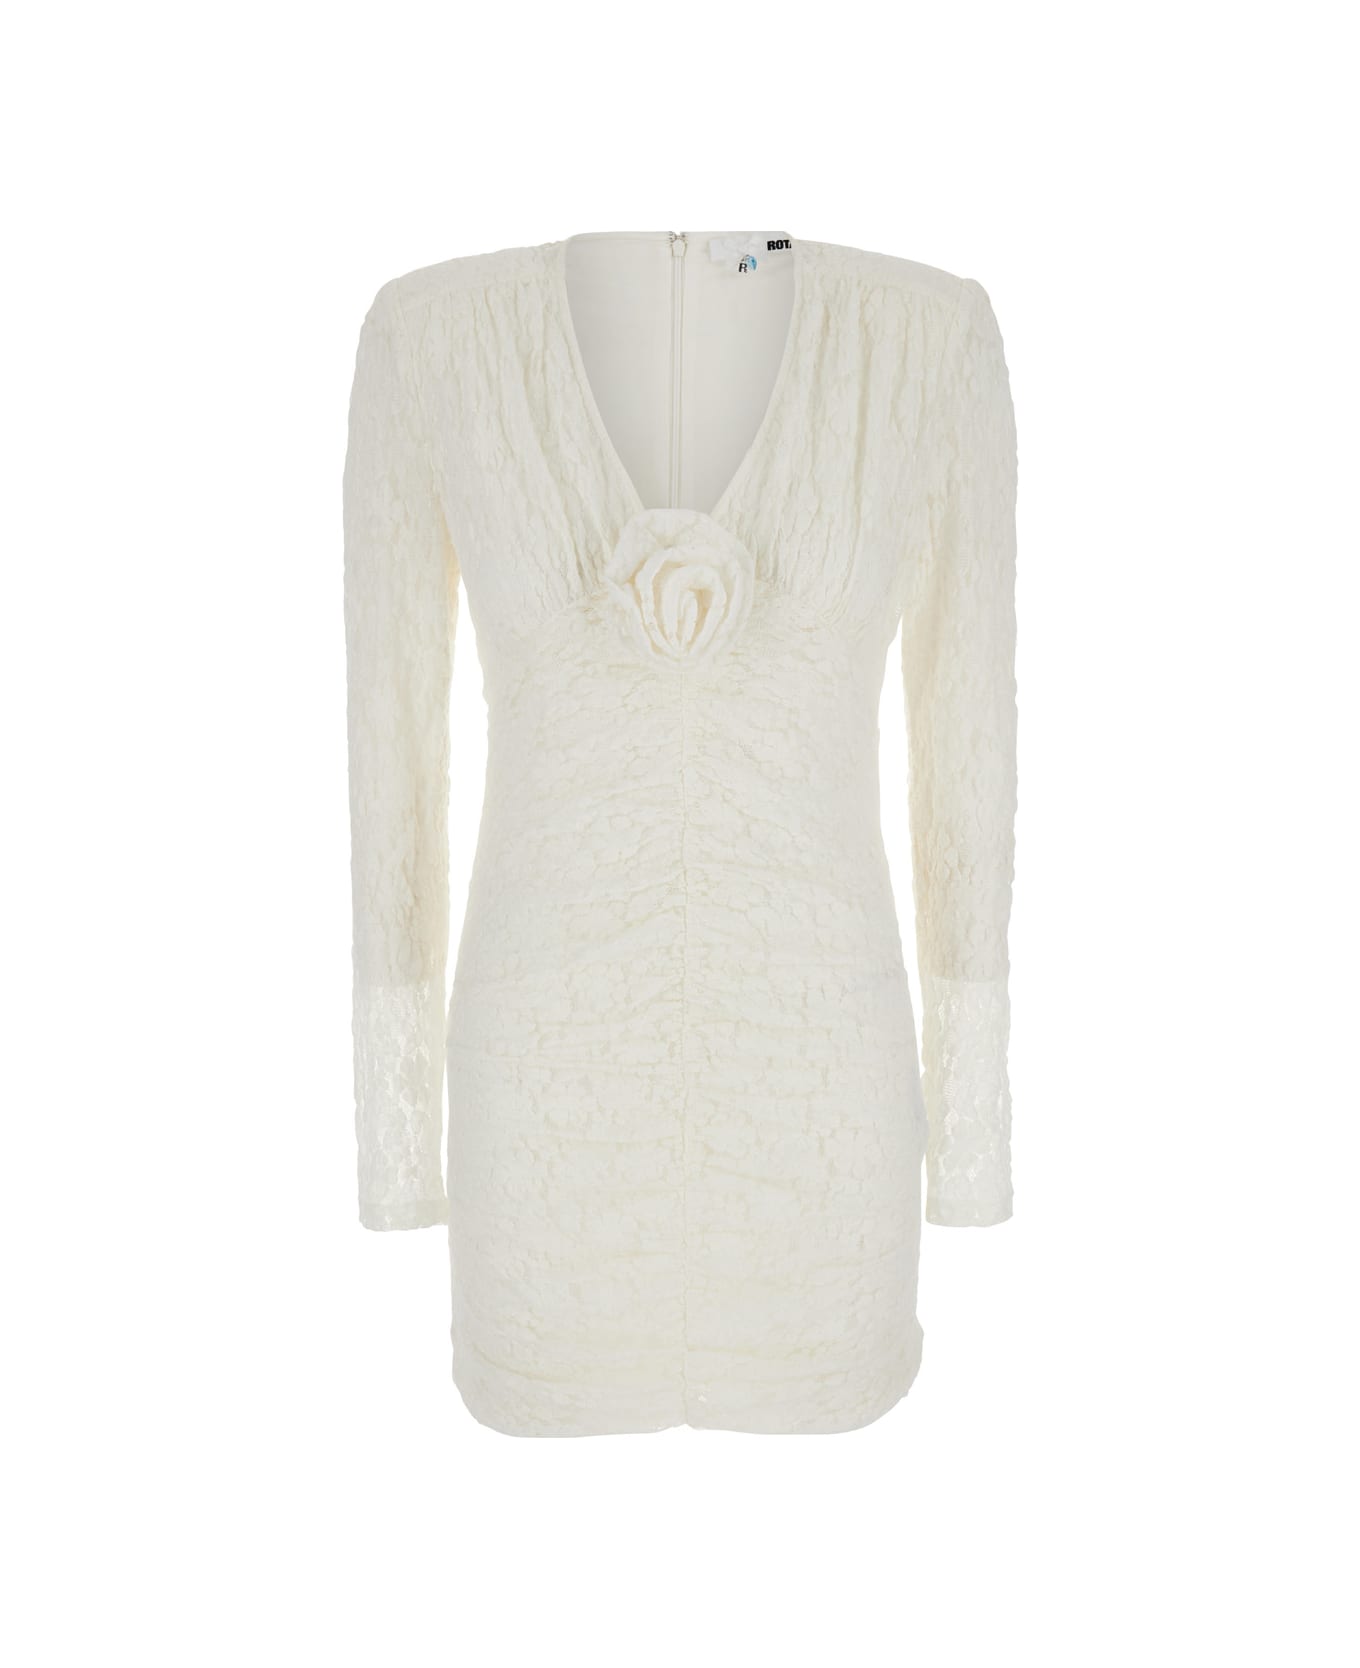 Rotate by Birger Christensen Mini White Dress With Rose Patch In Lace Woman - White